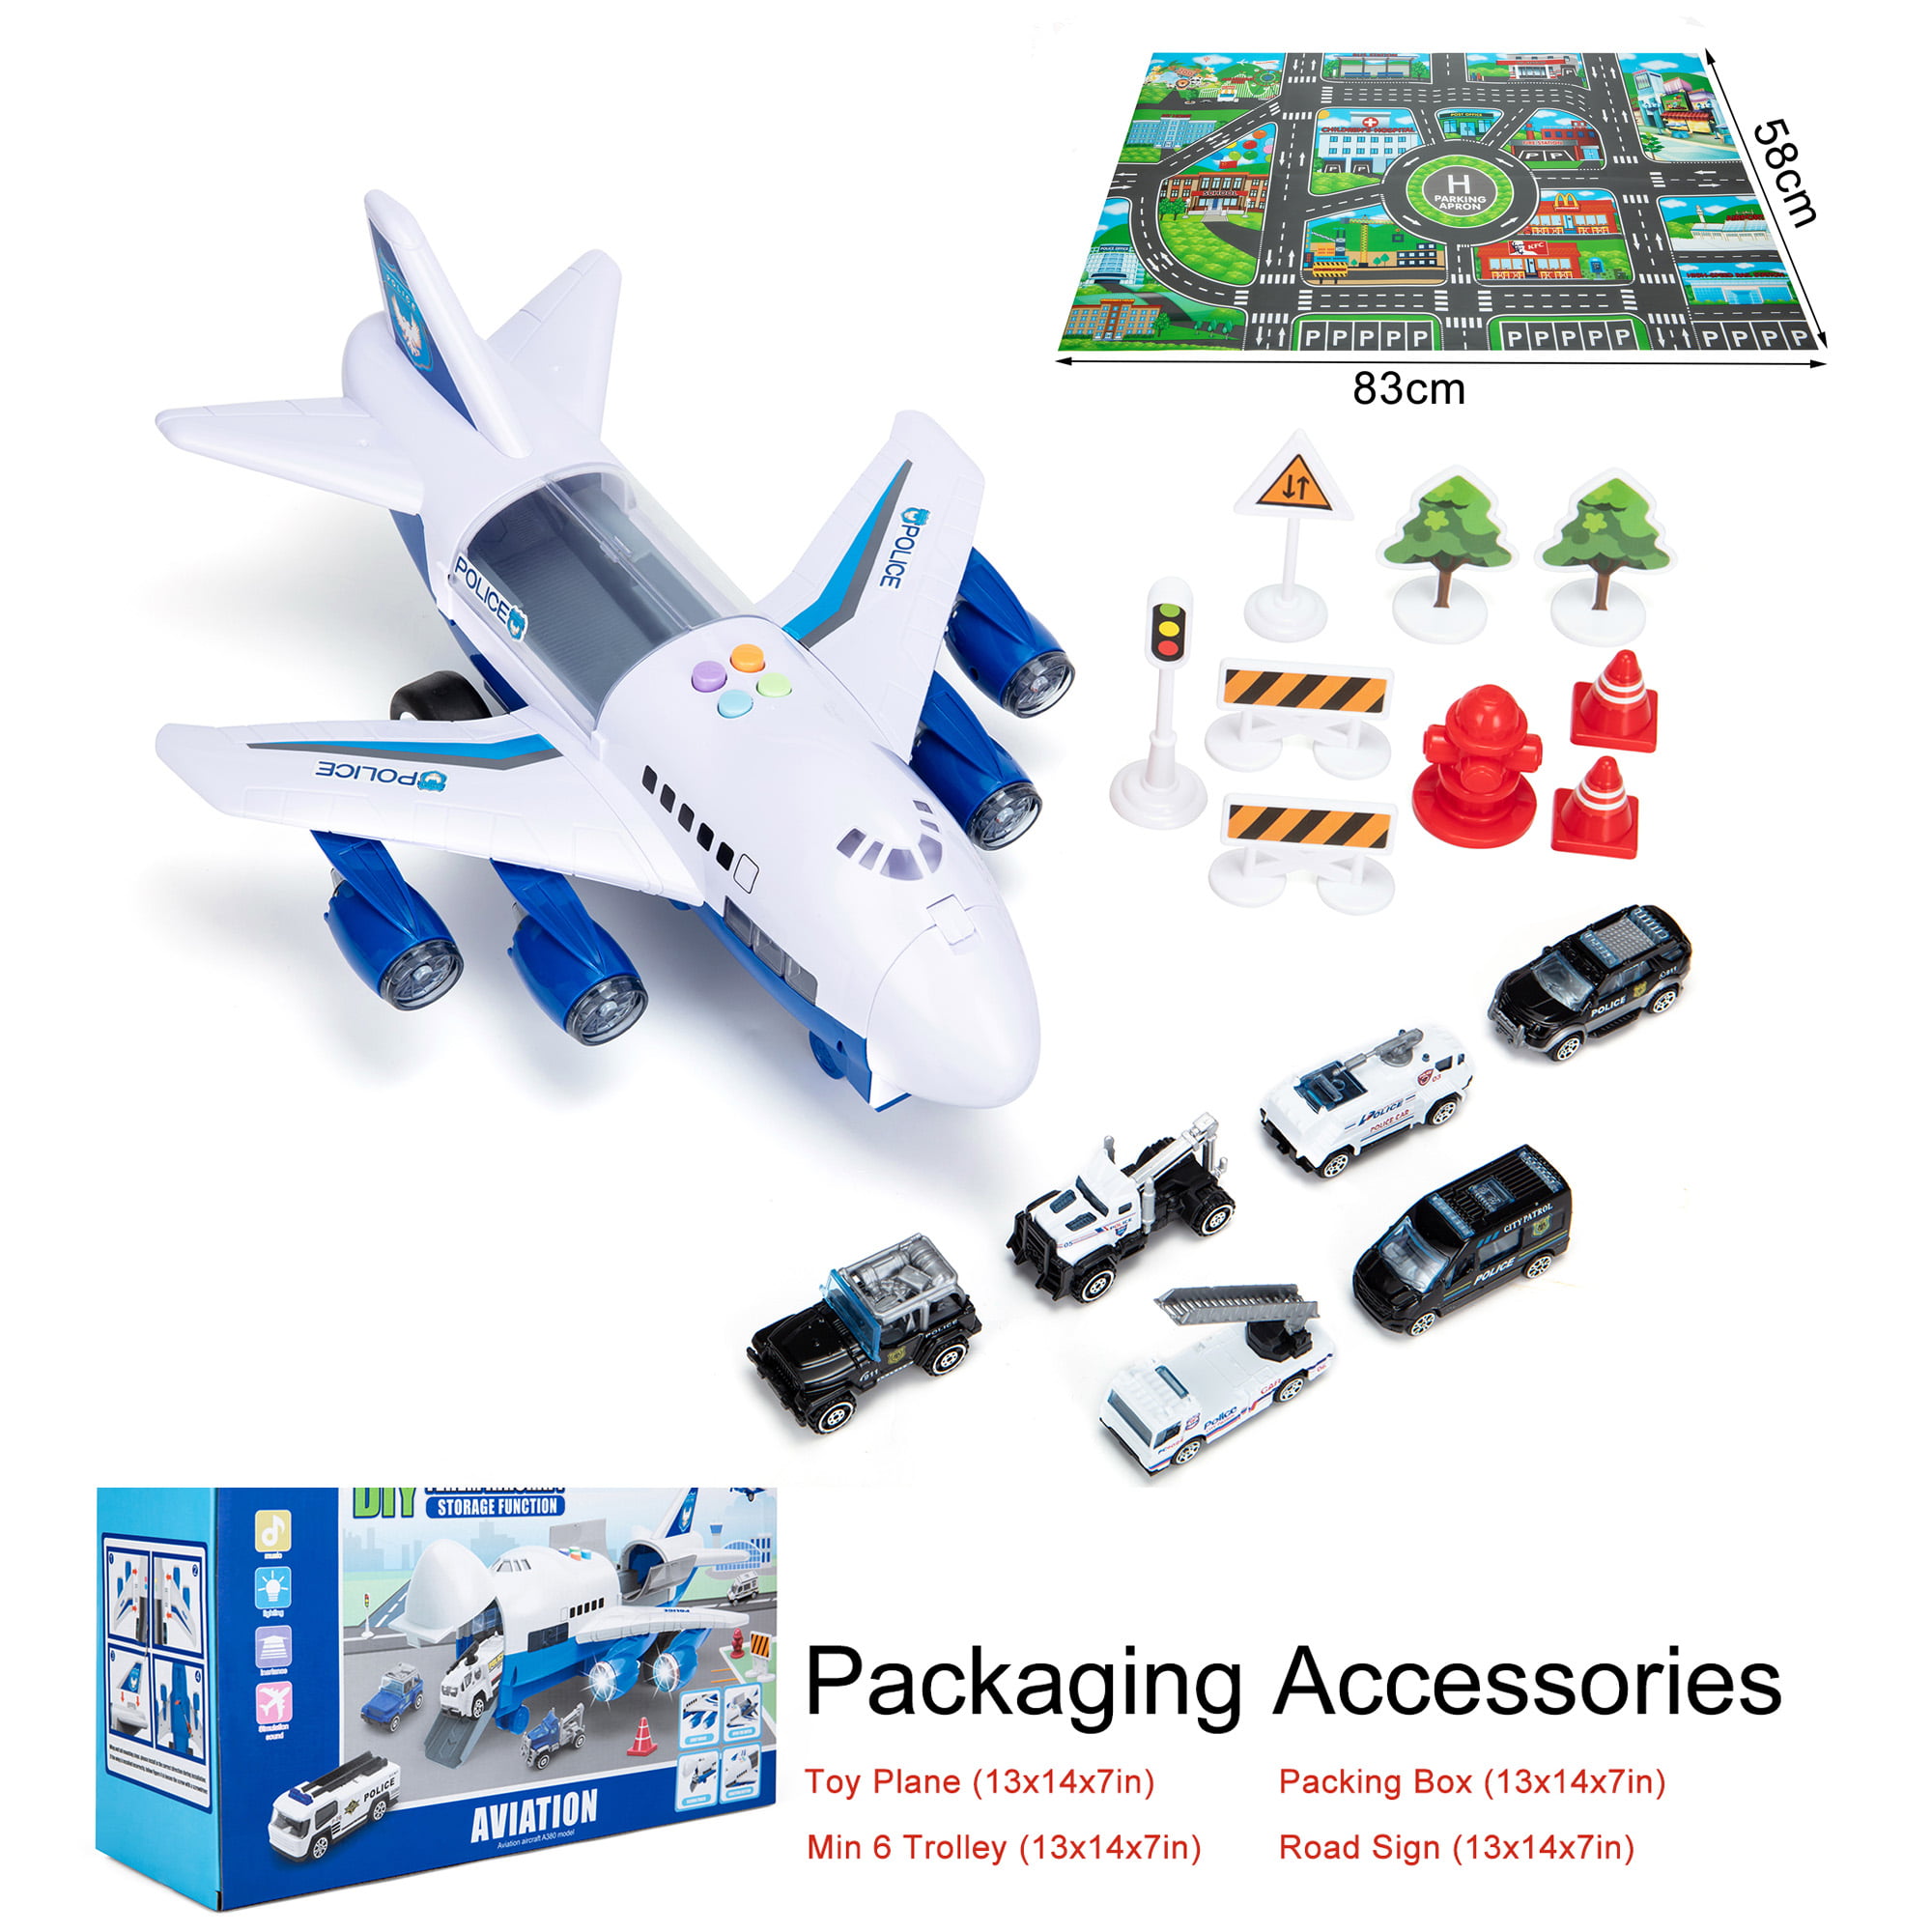 Medium Dwi Dowellin Transport Cargo Airplane Toys with Construction Cars Toy Set and Play Mat,Plane with Light Up and Sounds,Birthday Gift for 3 4 5 6 Years Old Kids Boys Girls